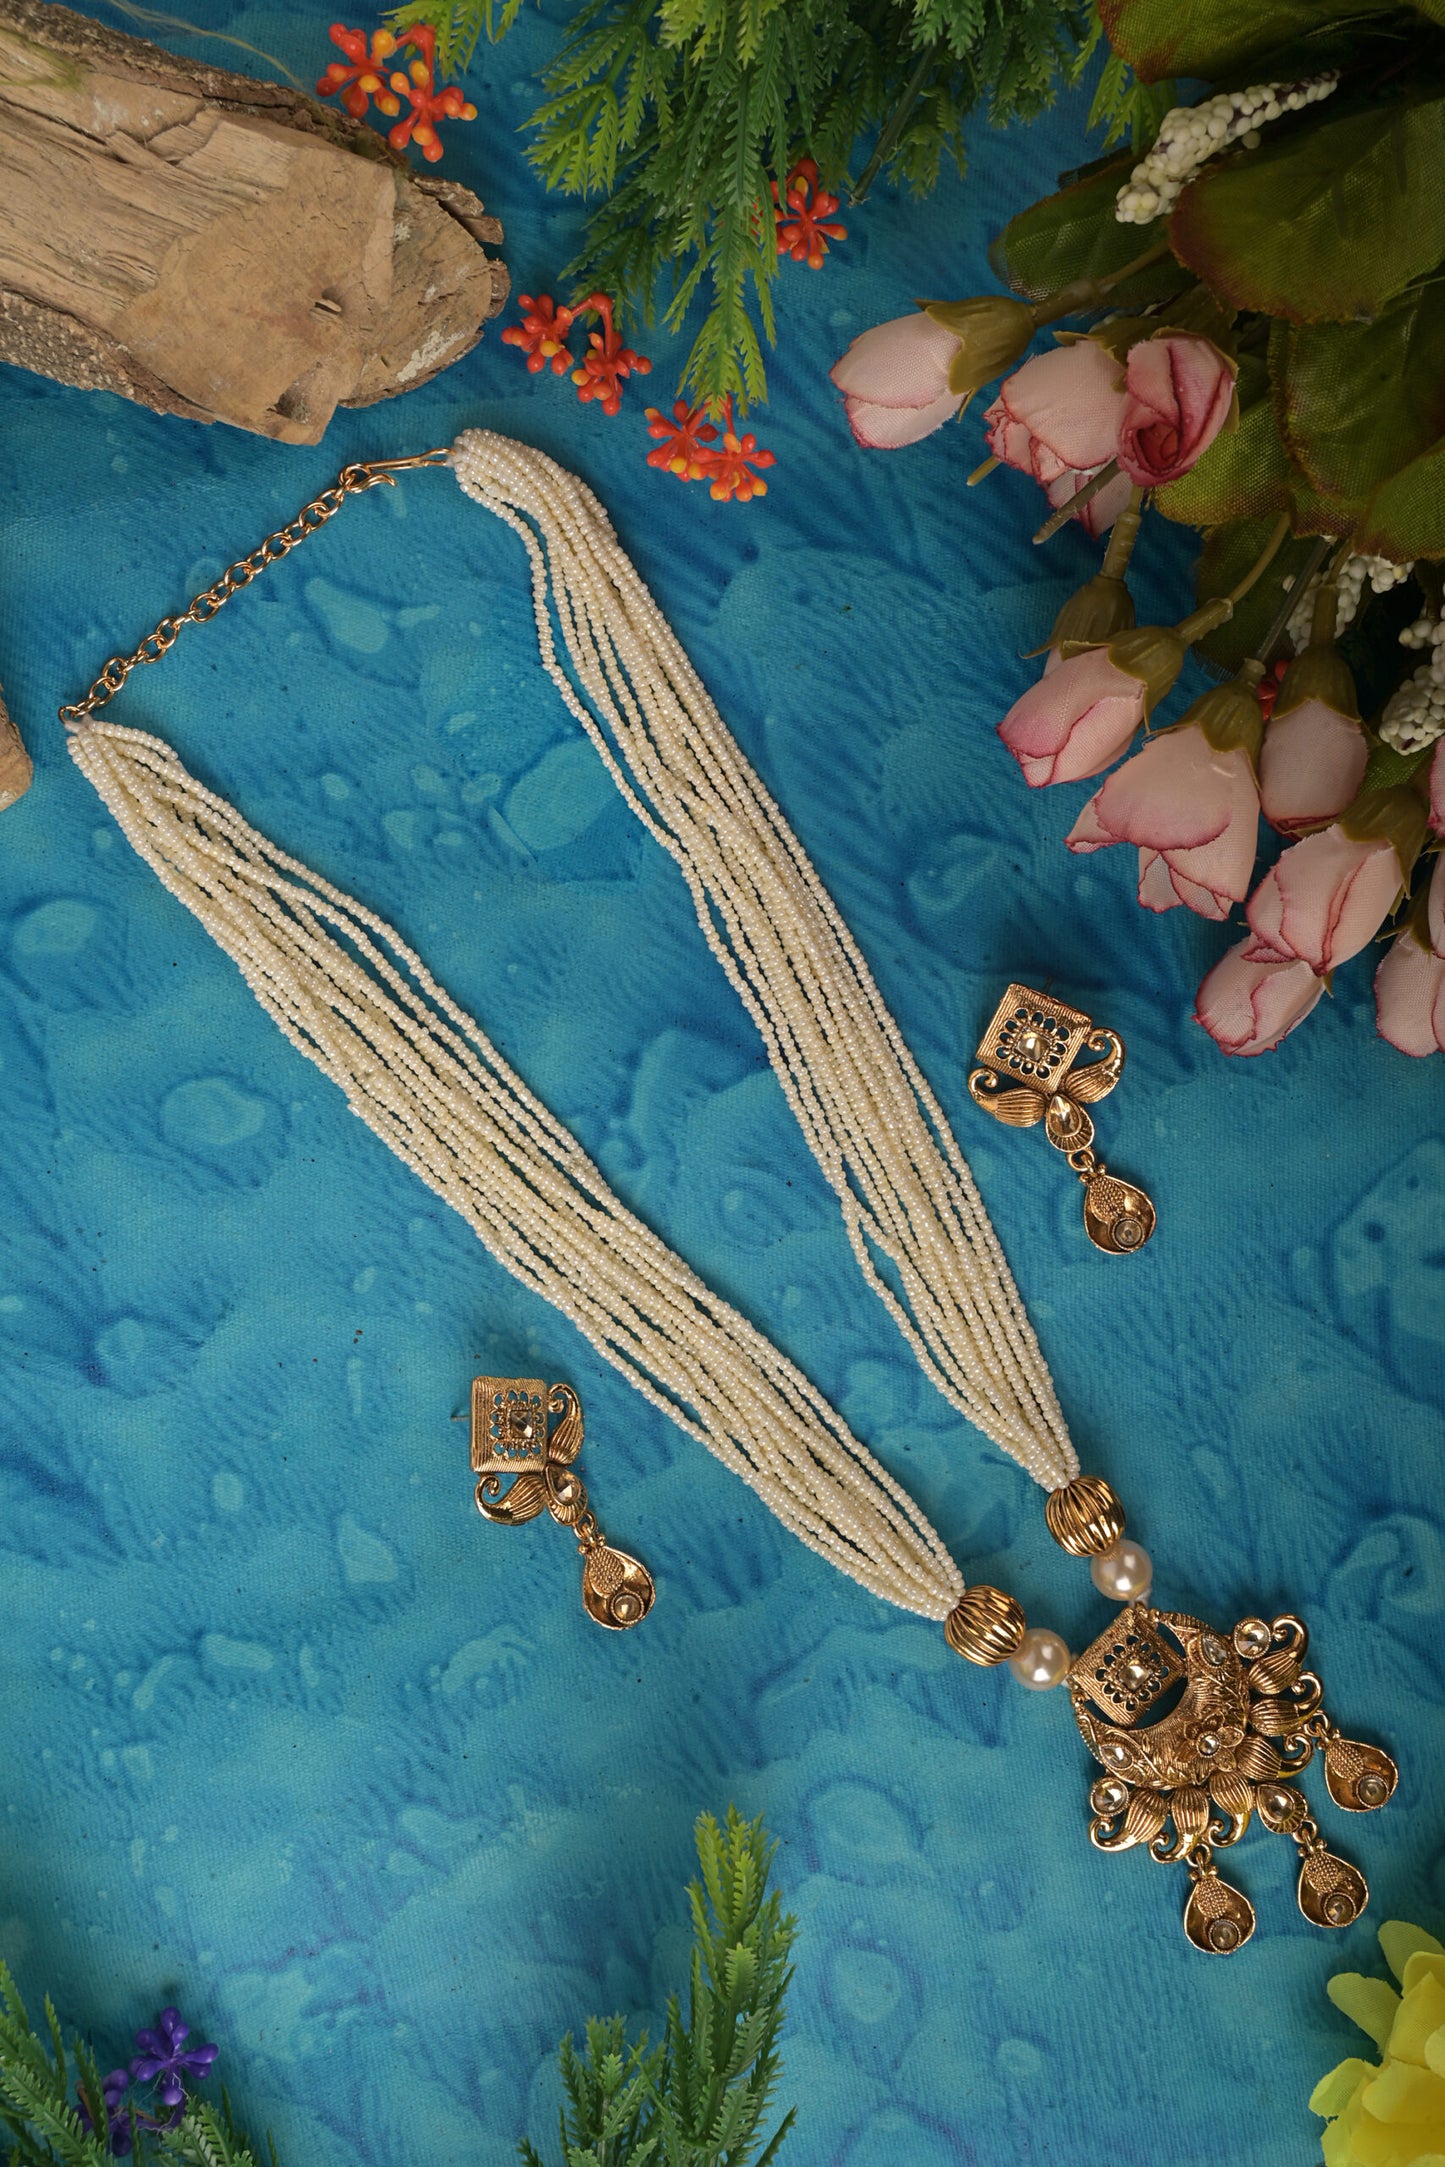 Long Gold Plated LCT Necklace